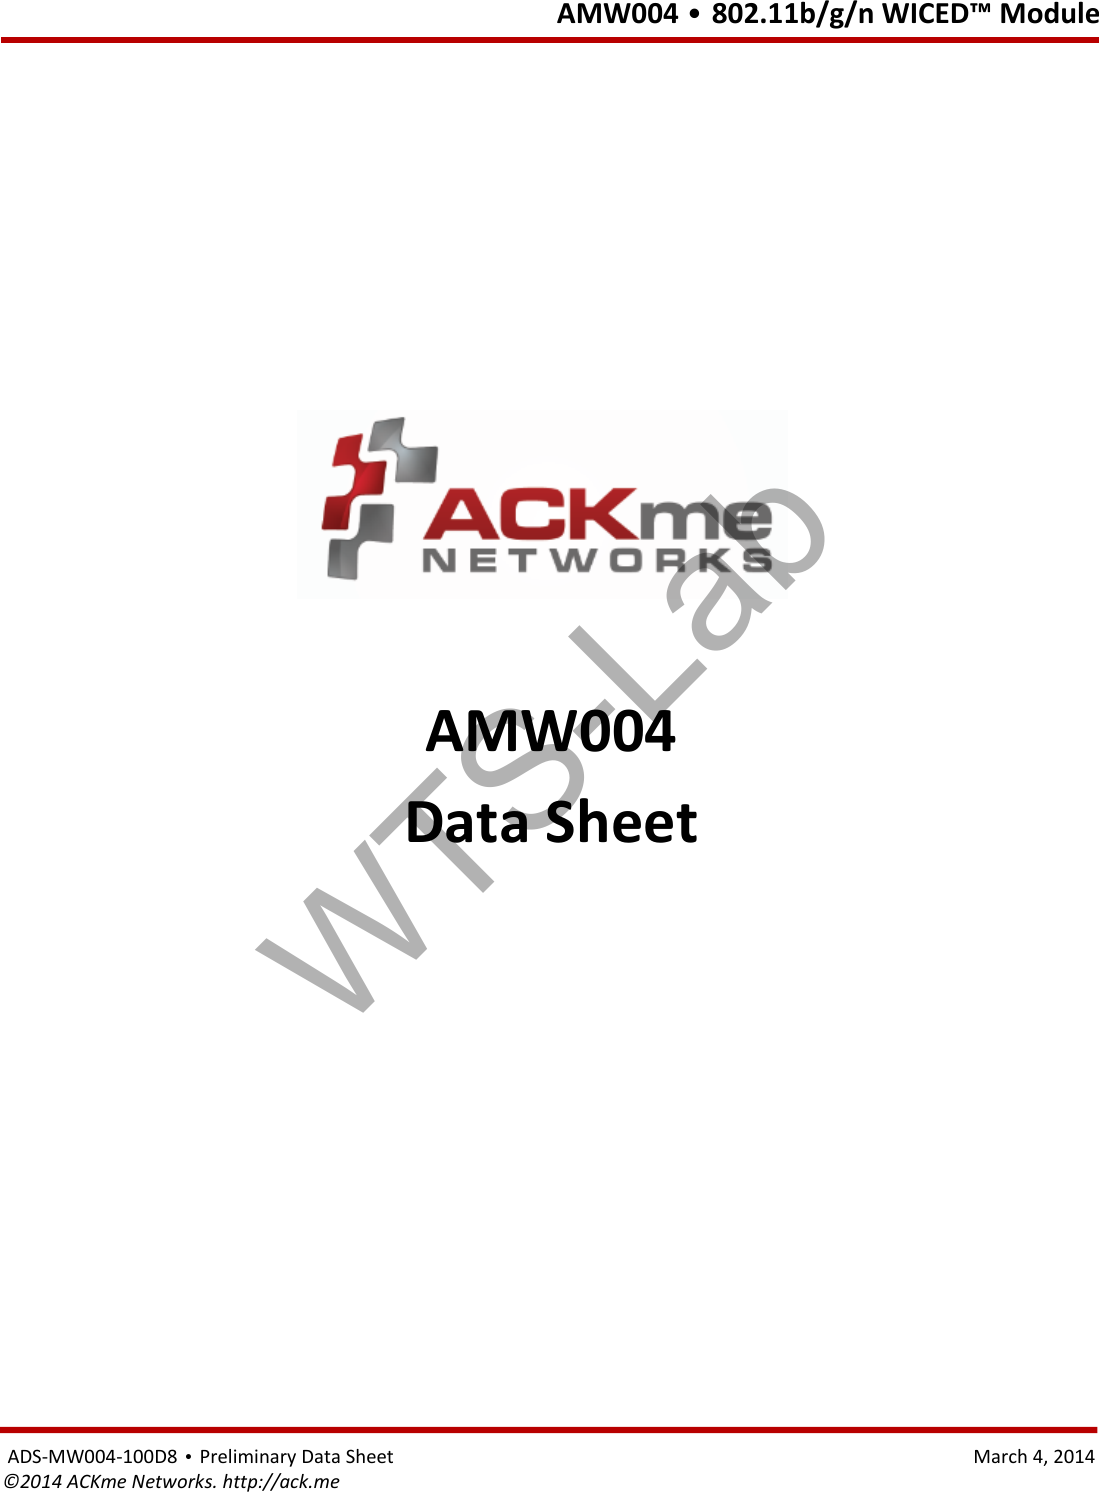   AMW004 • 802.11b/g/n WICED™ Module  ADS-MW004-100D8 • Preliminary Data Sheet    March 4, 2014 ©2014 ACKme Networks. http://ack.me                   AMW004 Data Sheet  WTS-Lab